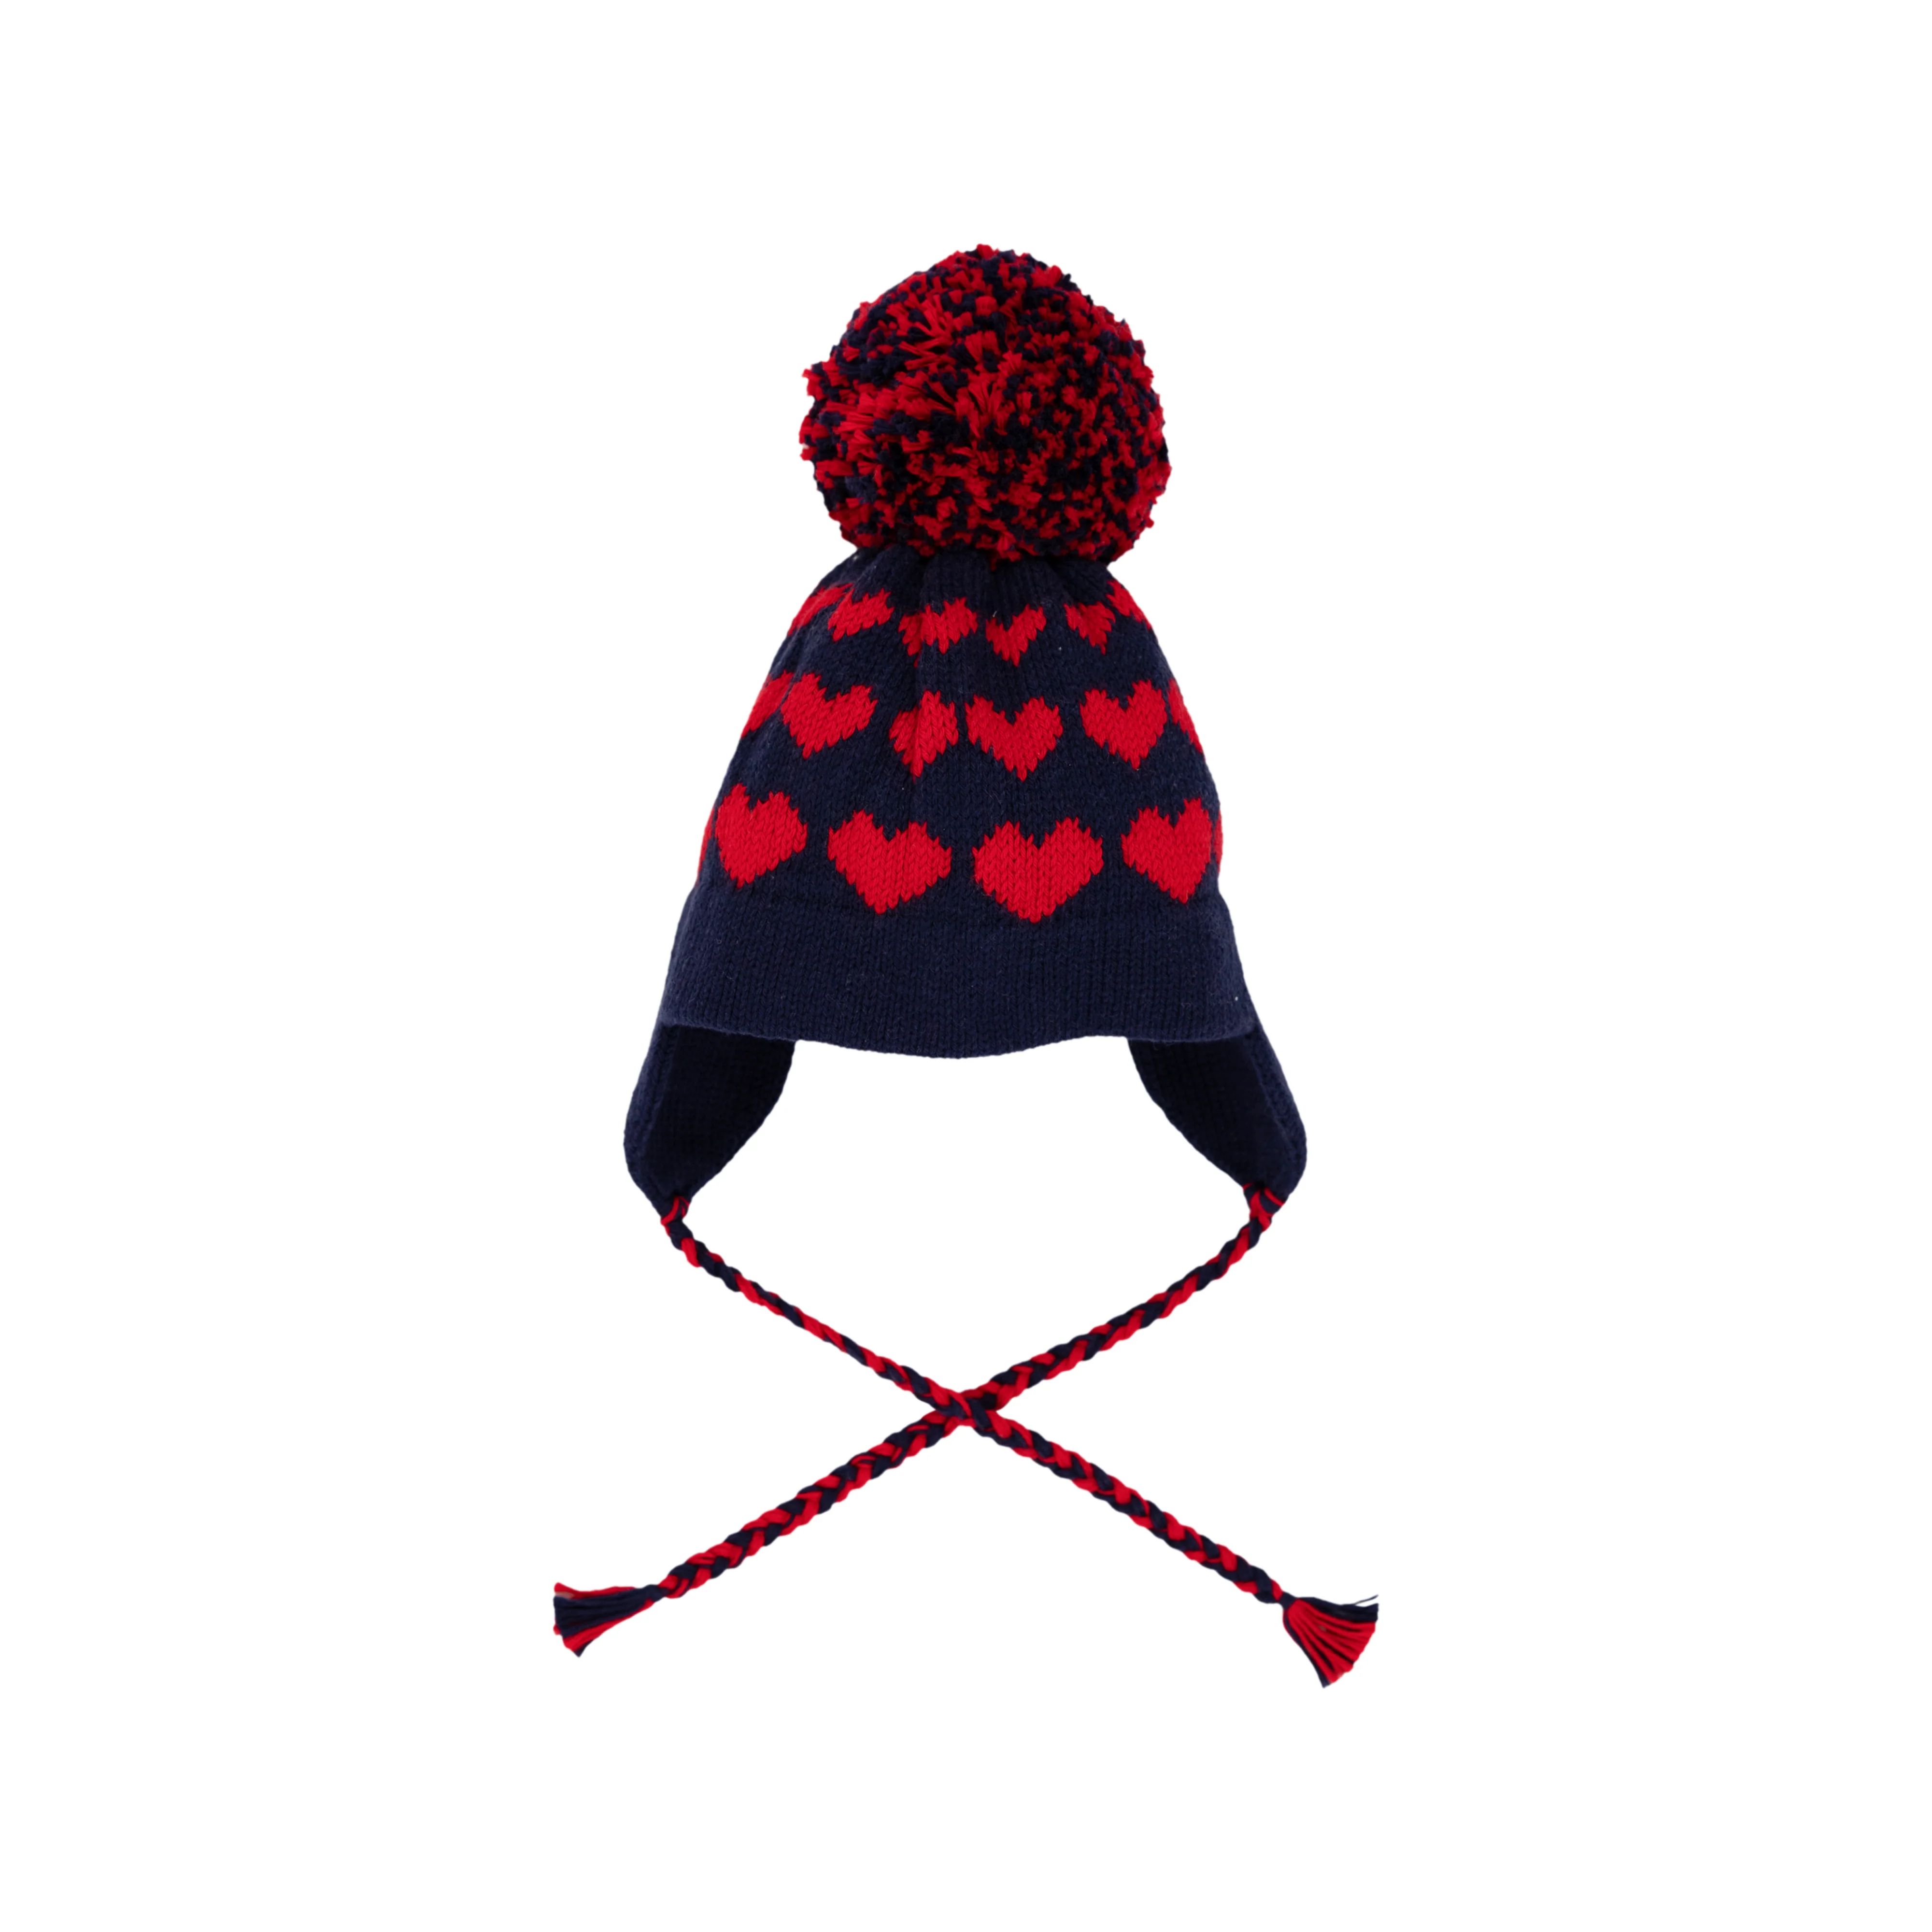 Parrish Pom Pom Hat - Nantucket Navy with Richmond Red Hearts | The Beaufort Bonnet Company